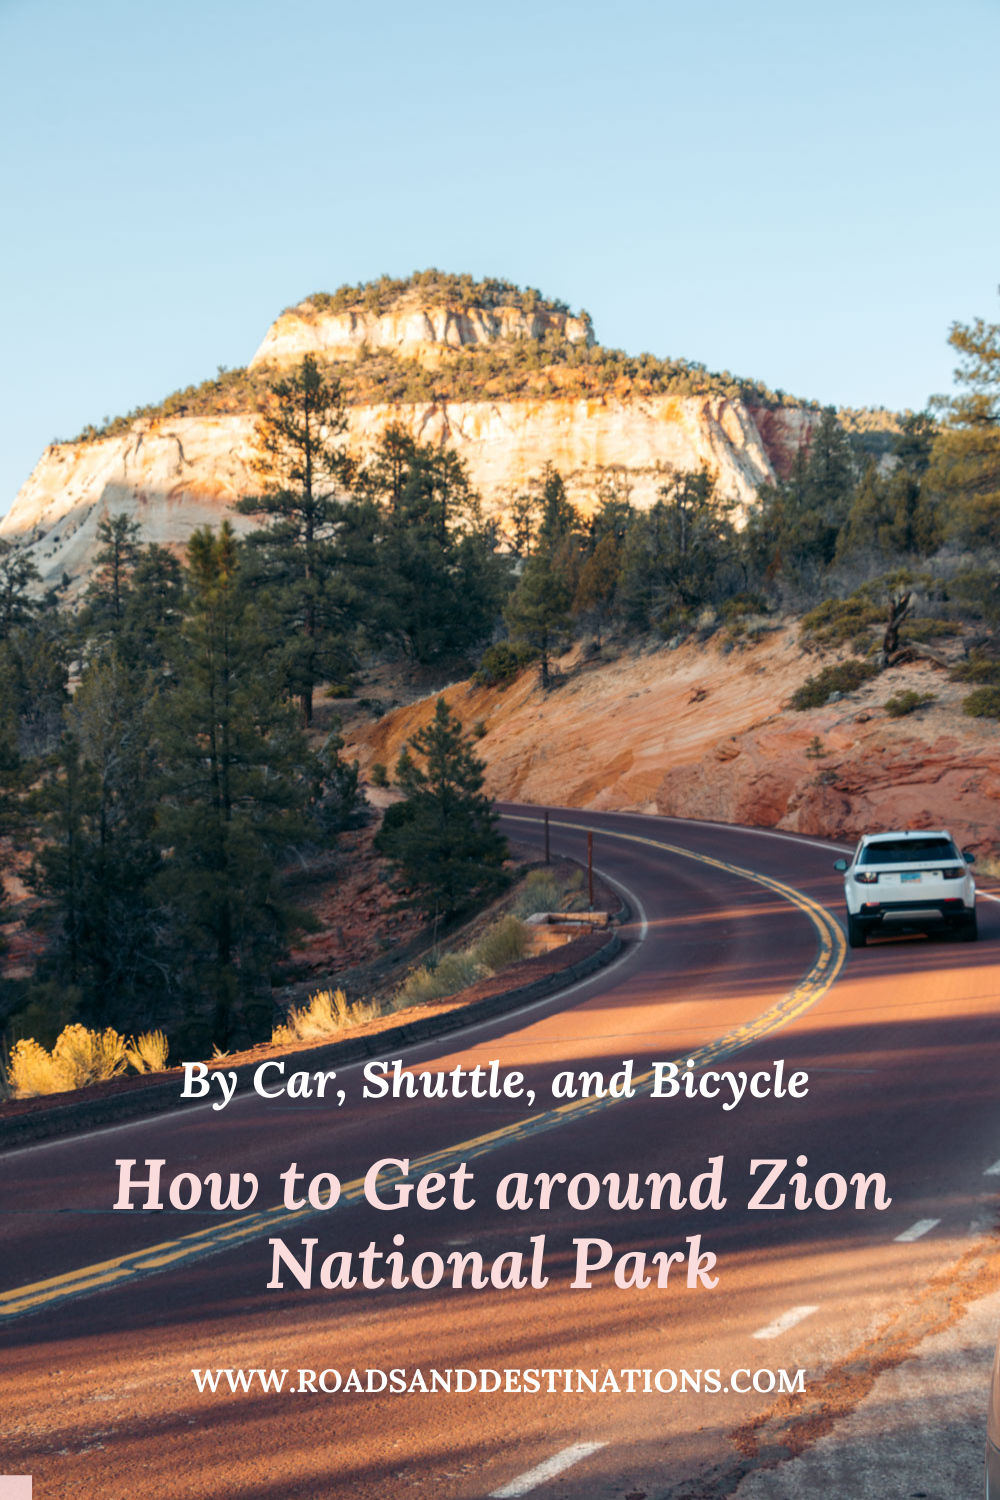 How to get around Zion National Park - Roads and Destinations.